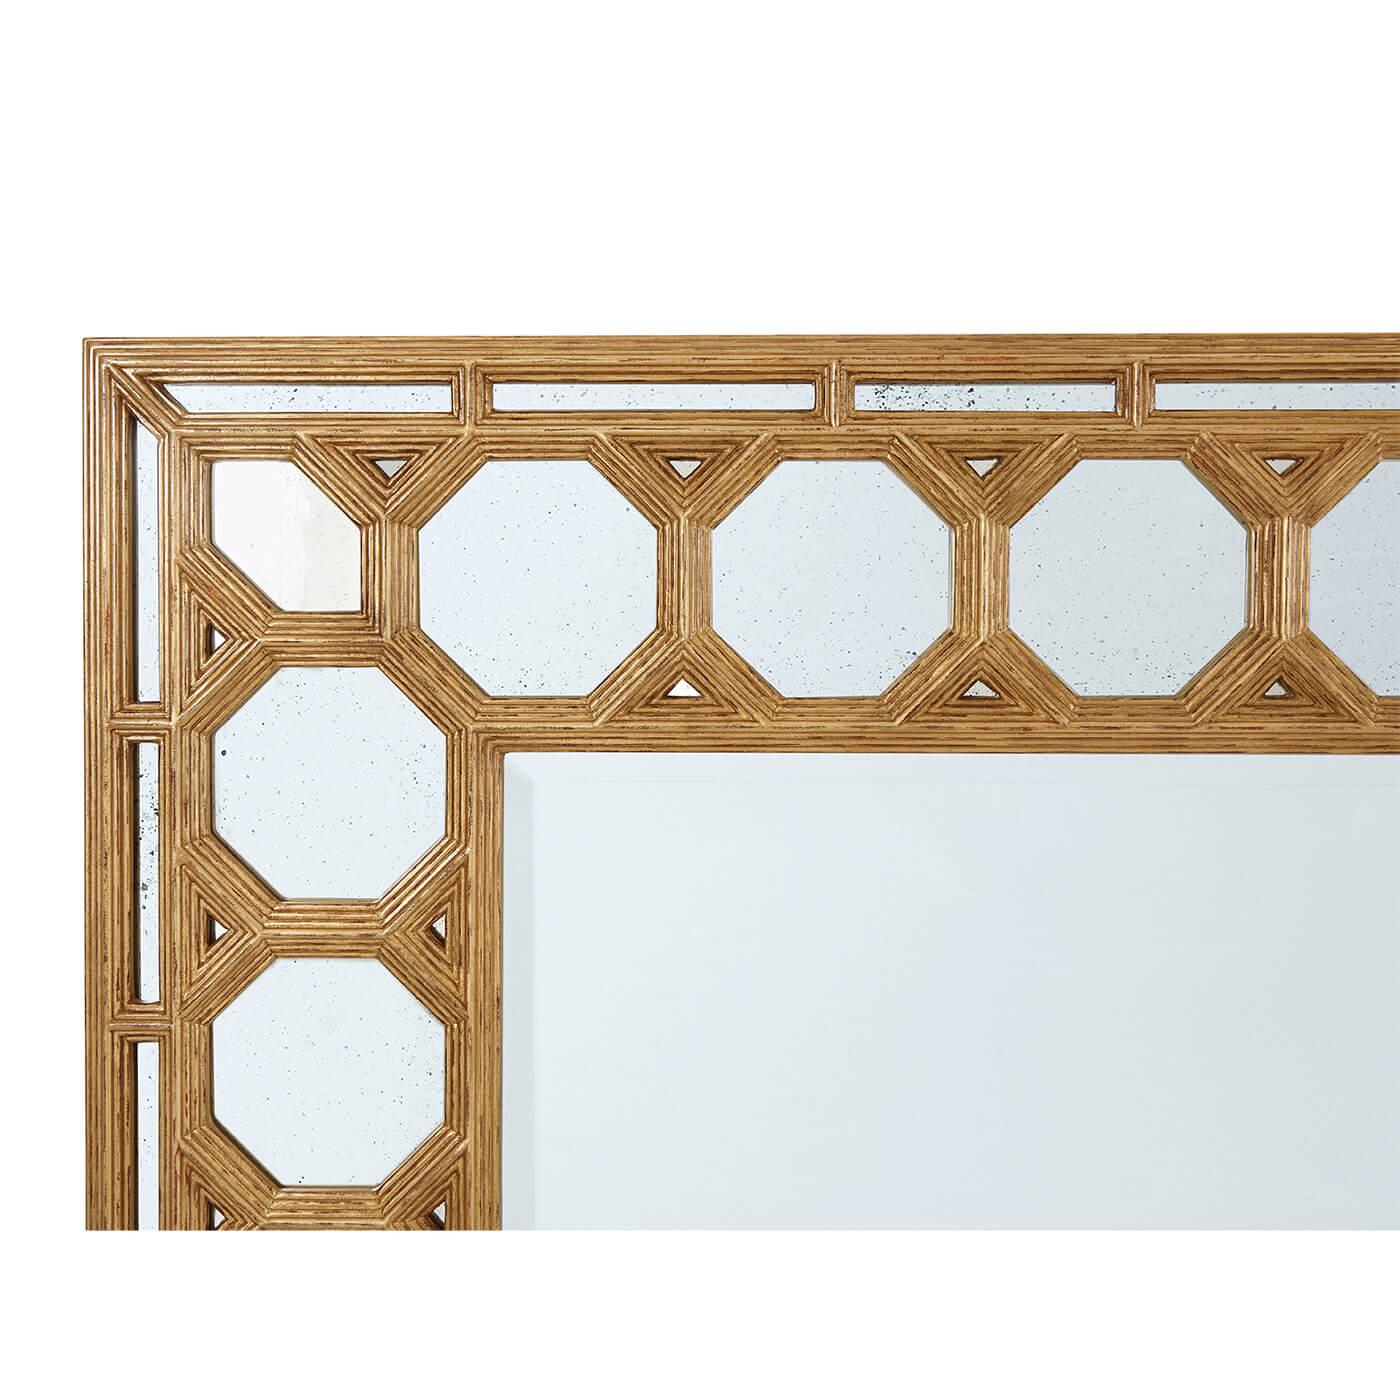 A Spanish Baroque style gilt mirror. This beveled-edge antiqued mirror center is set in a frame of consecutive octagonal coffered mirrored plates. The optics are gorgeous in this decorative mirror. May be hung horizontally or